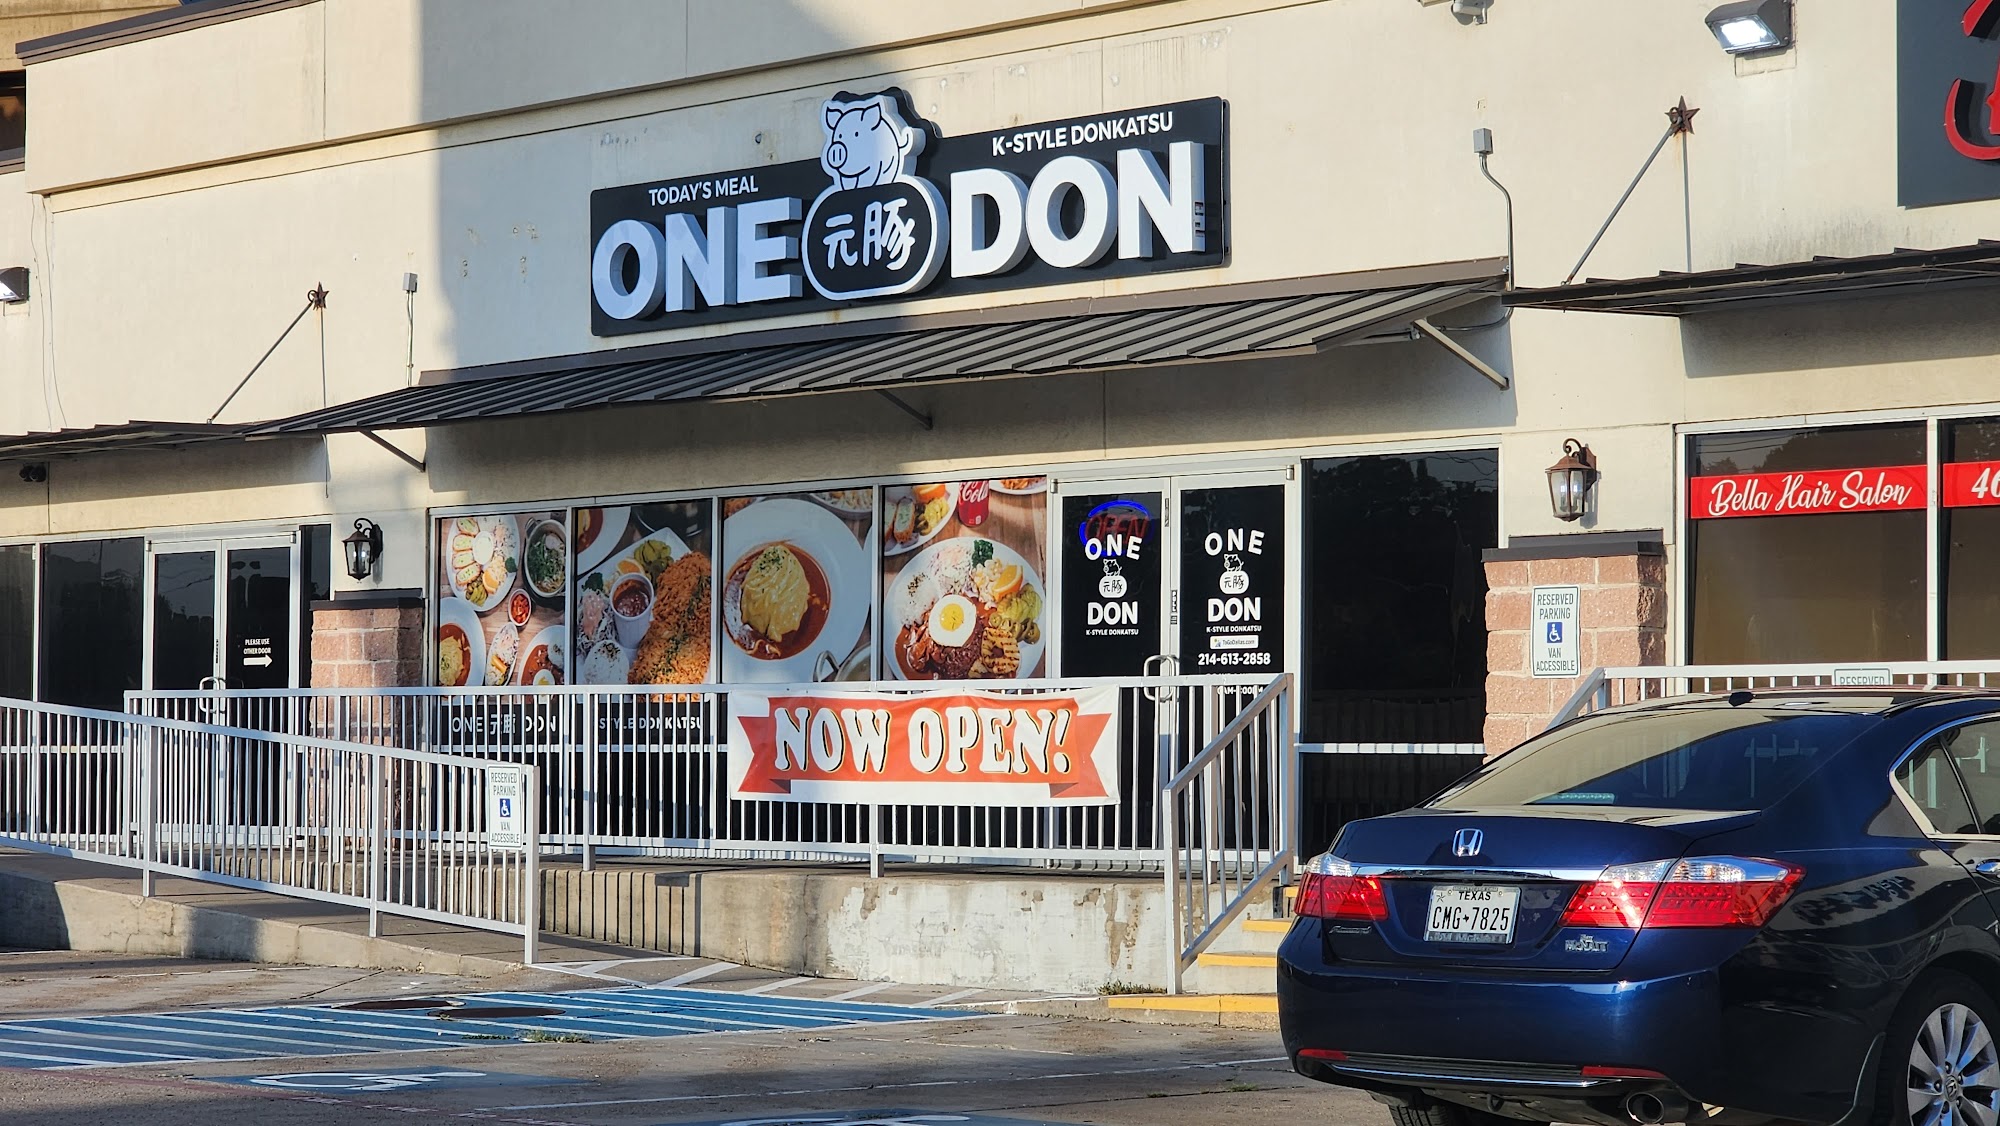 Onedon 원돈 (todays meal dallas)